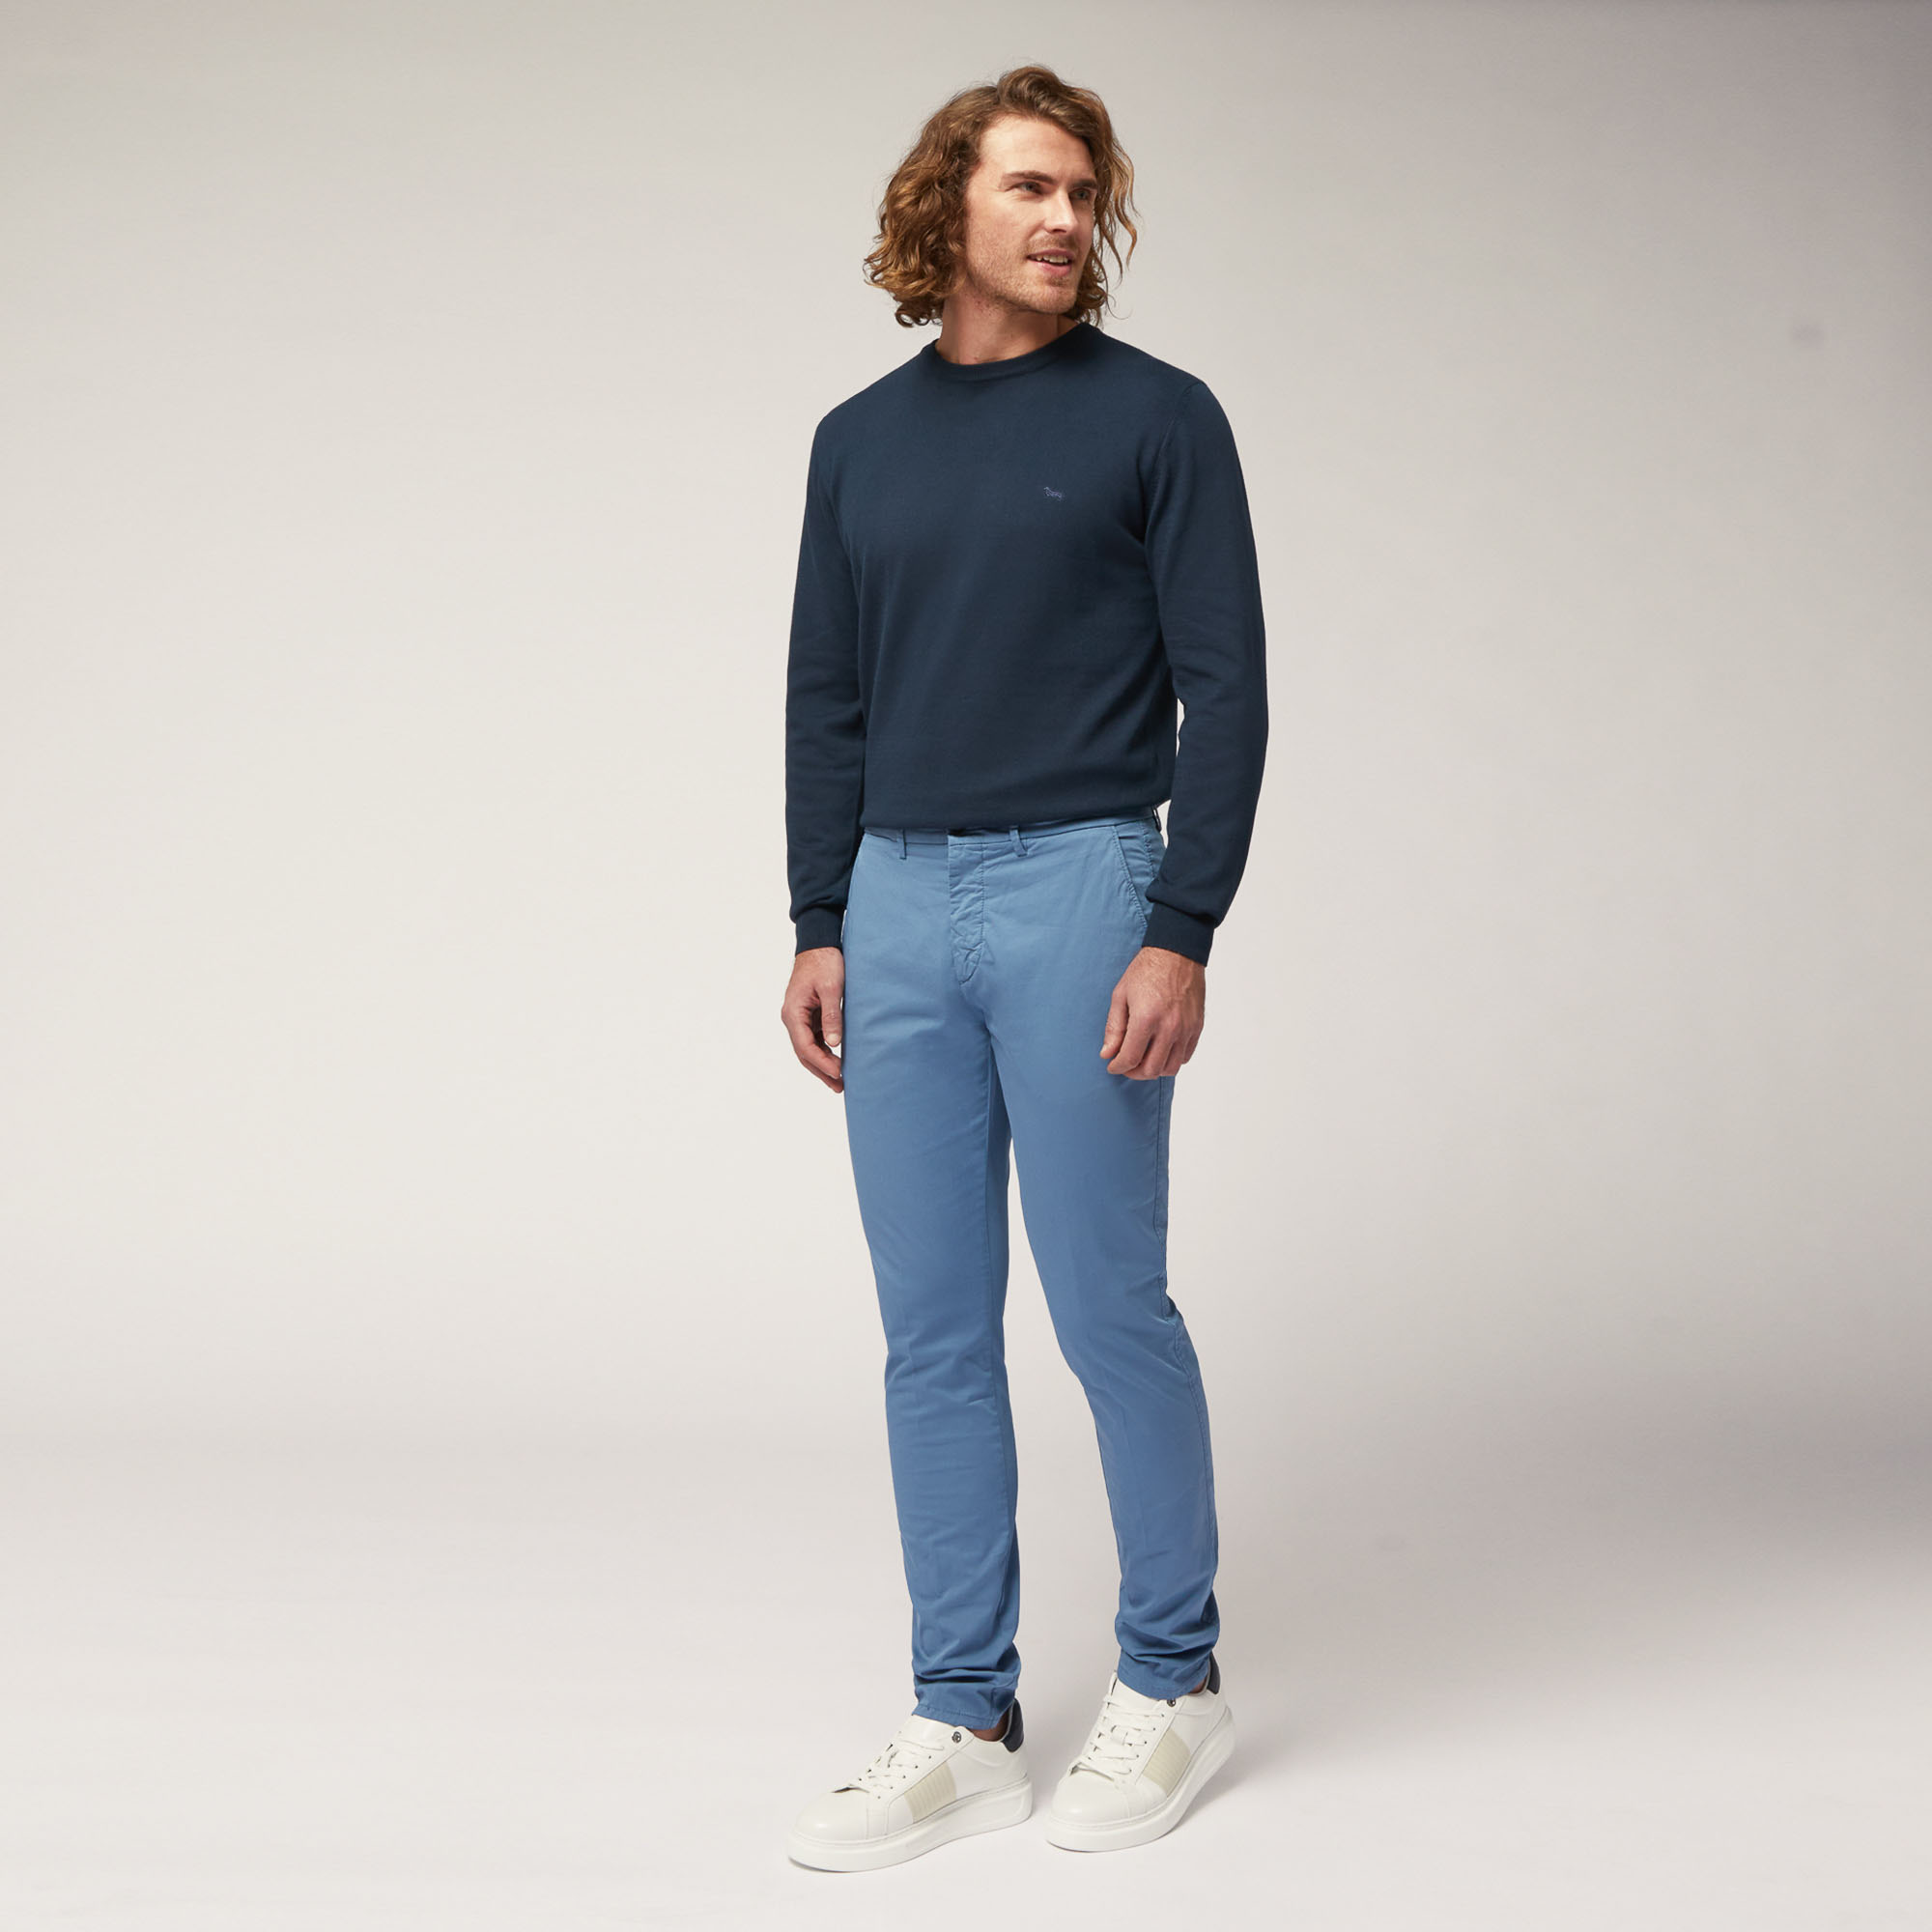 Narrow Fit Chino Pants, Blue, large image number 3